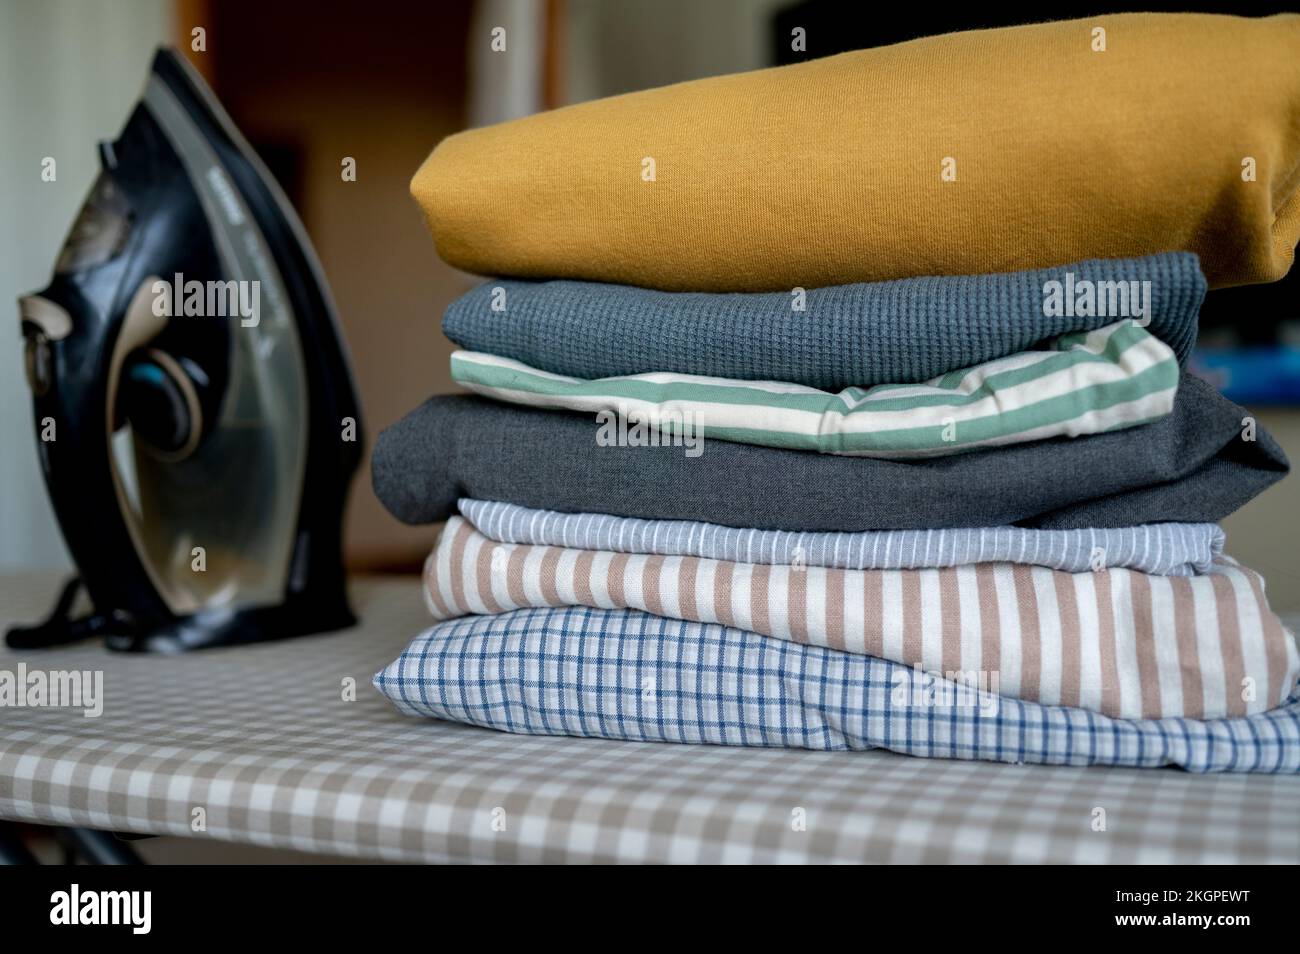 Iron by stack of clean clothes on ironing board at home Stock Photo